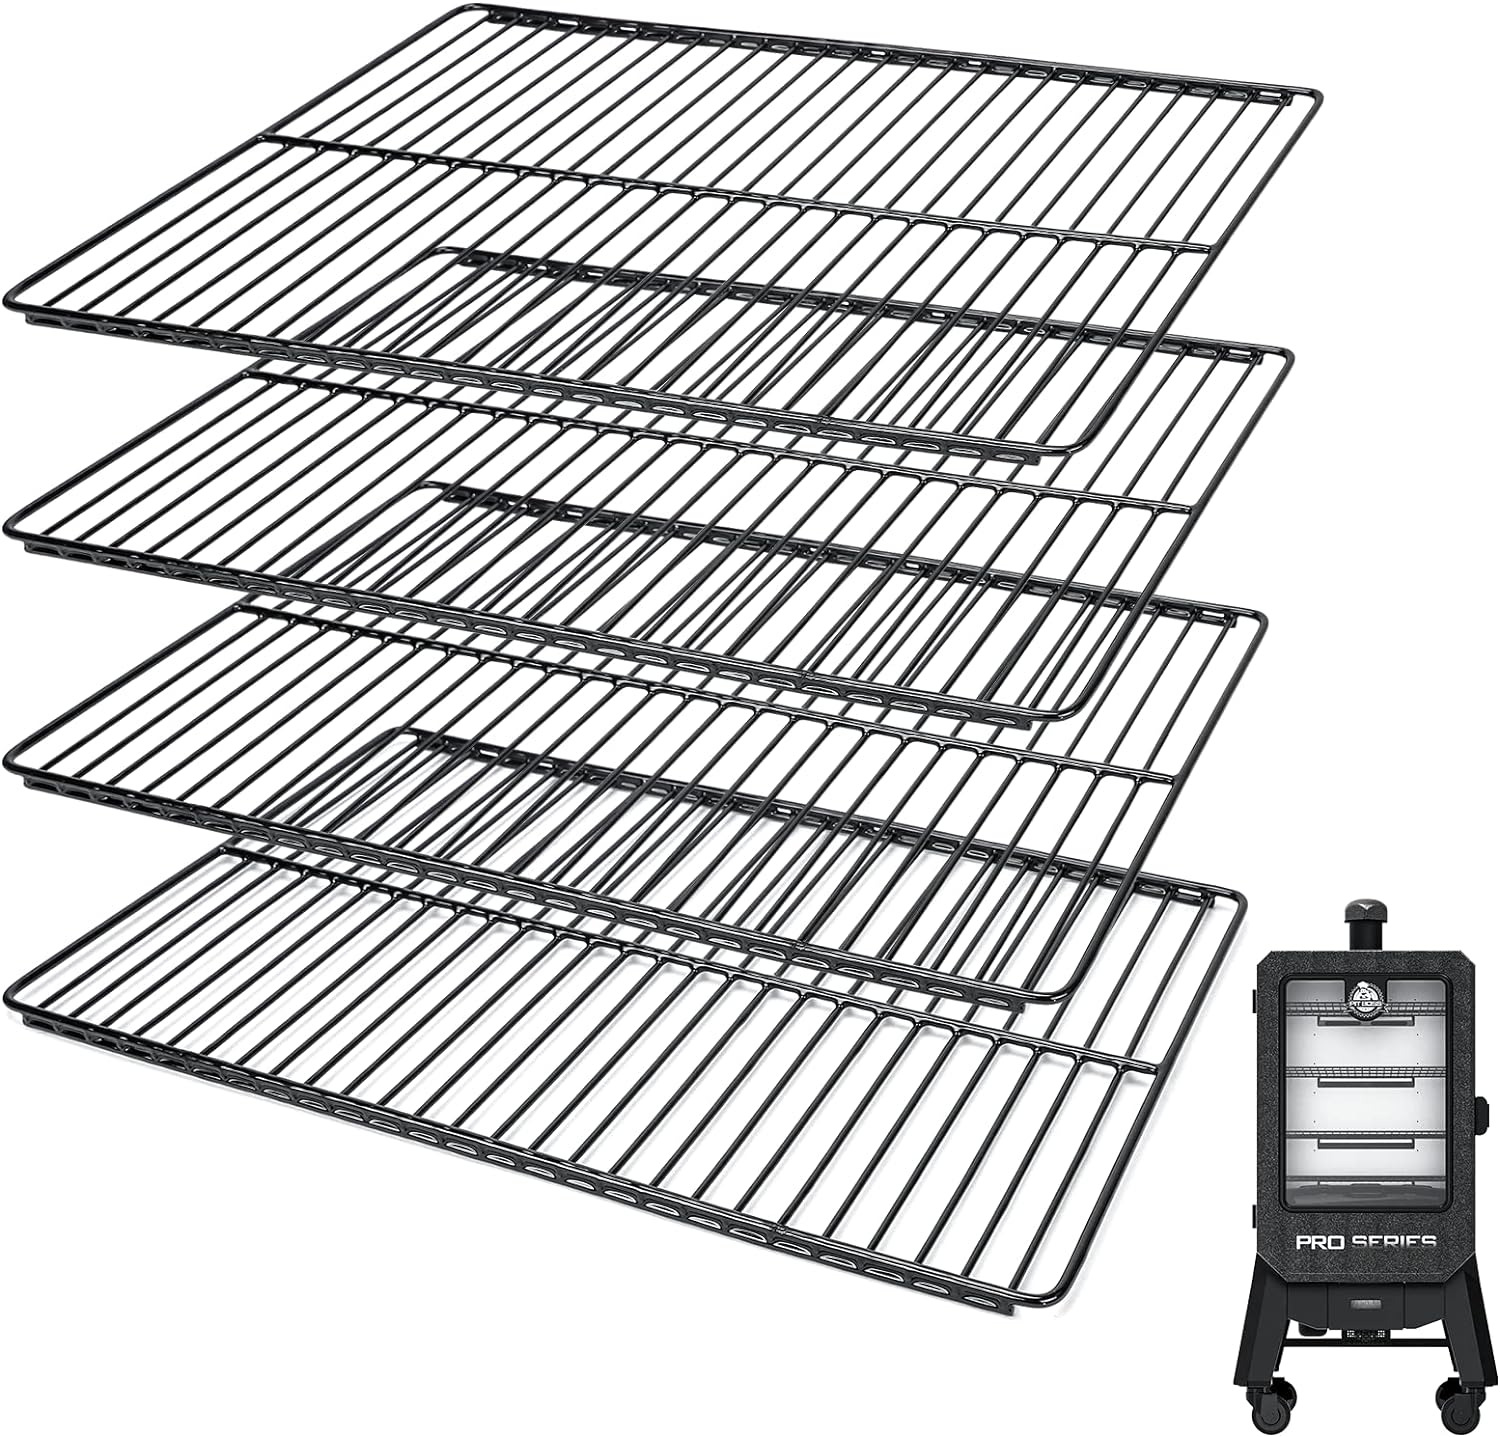 Cooking Grates for Pit Boss Pro Series II 4-Series Vertical Wood Pellet Smoker